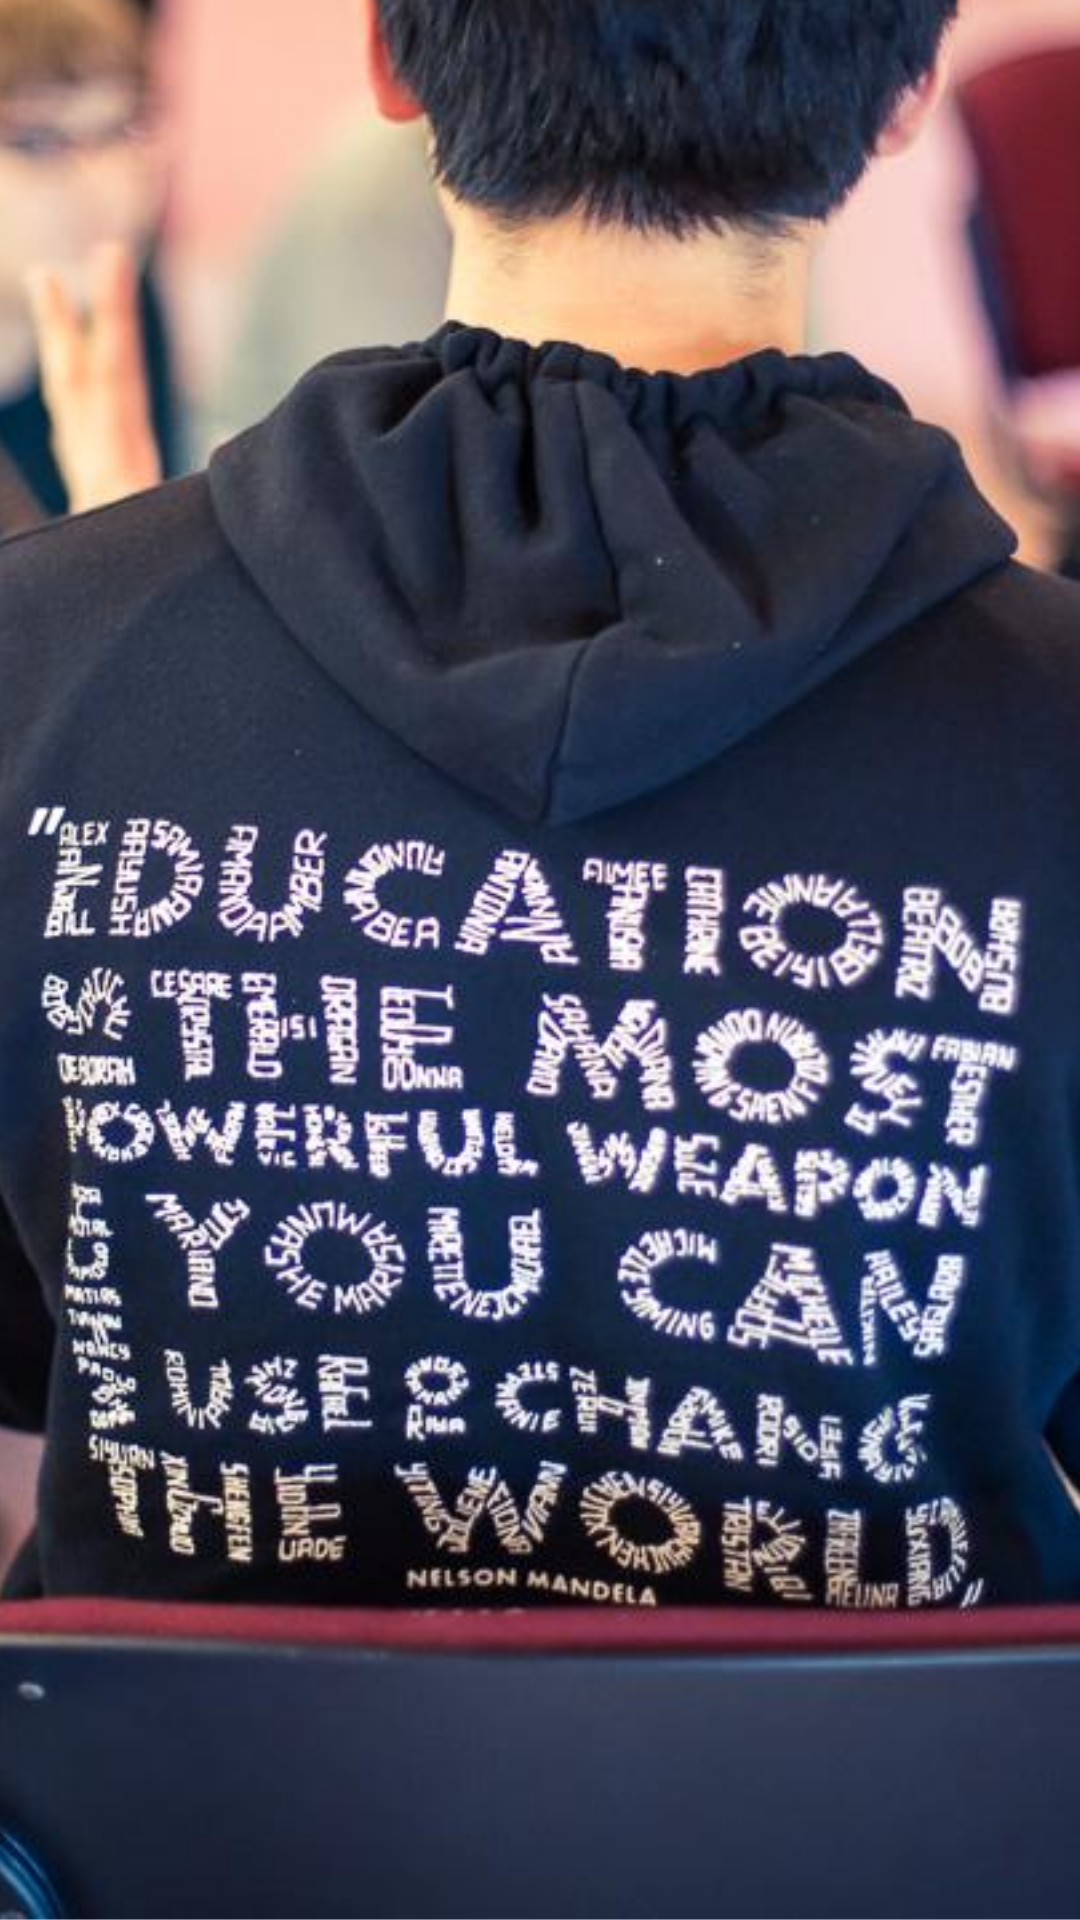 education is the most powerful weapon we can use to change the world - Nelson Mandela